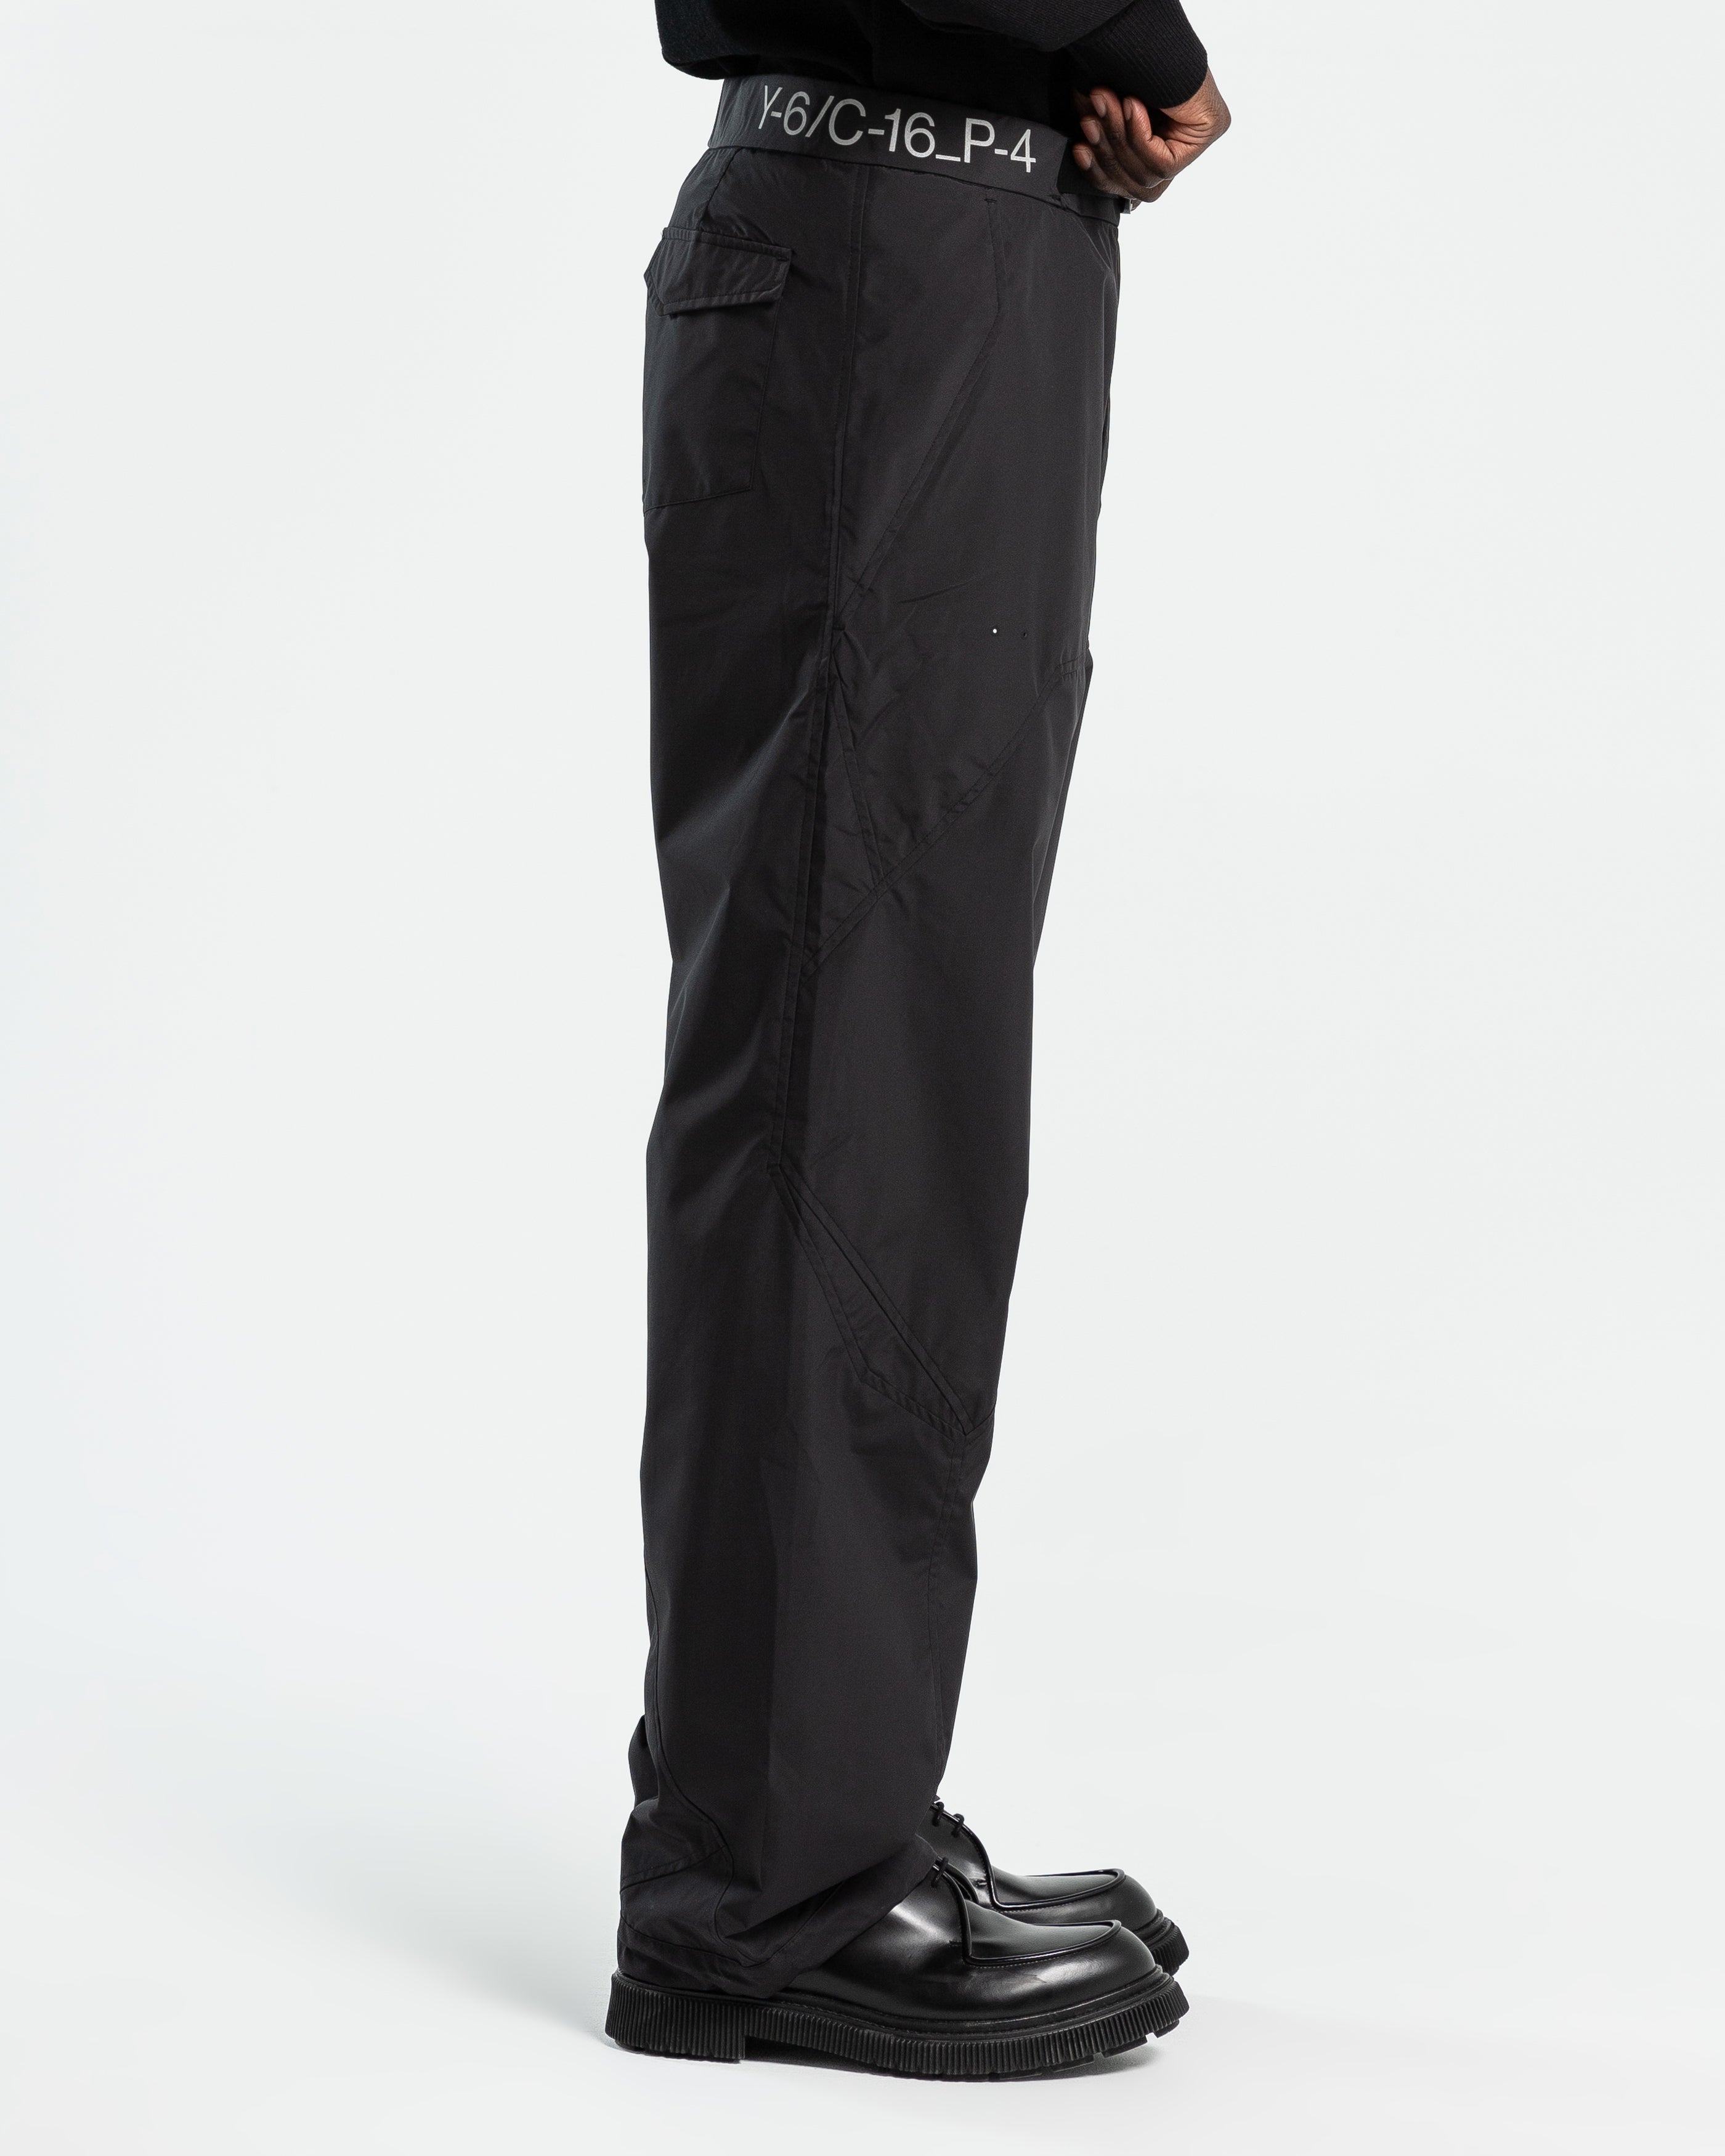 Nephin Storm Pants in Black